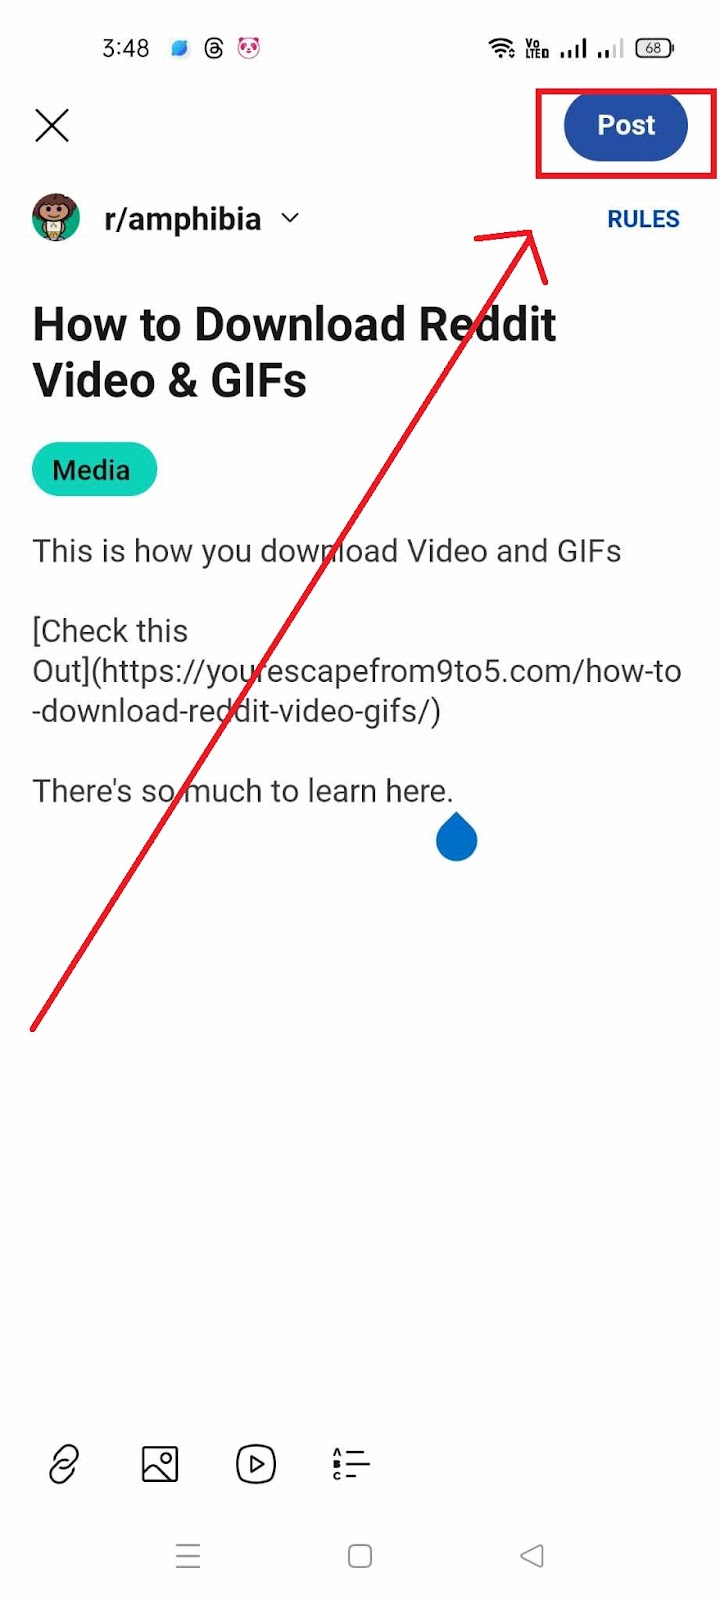 How to Add Links into Reddit Post and Comments - Click Post to Finish